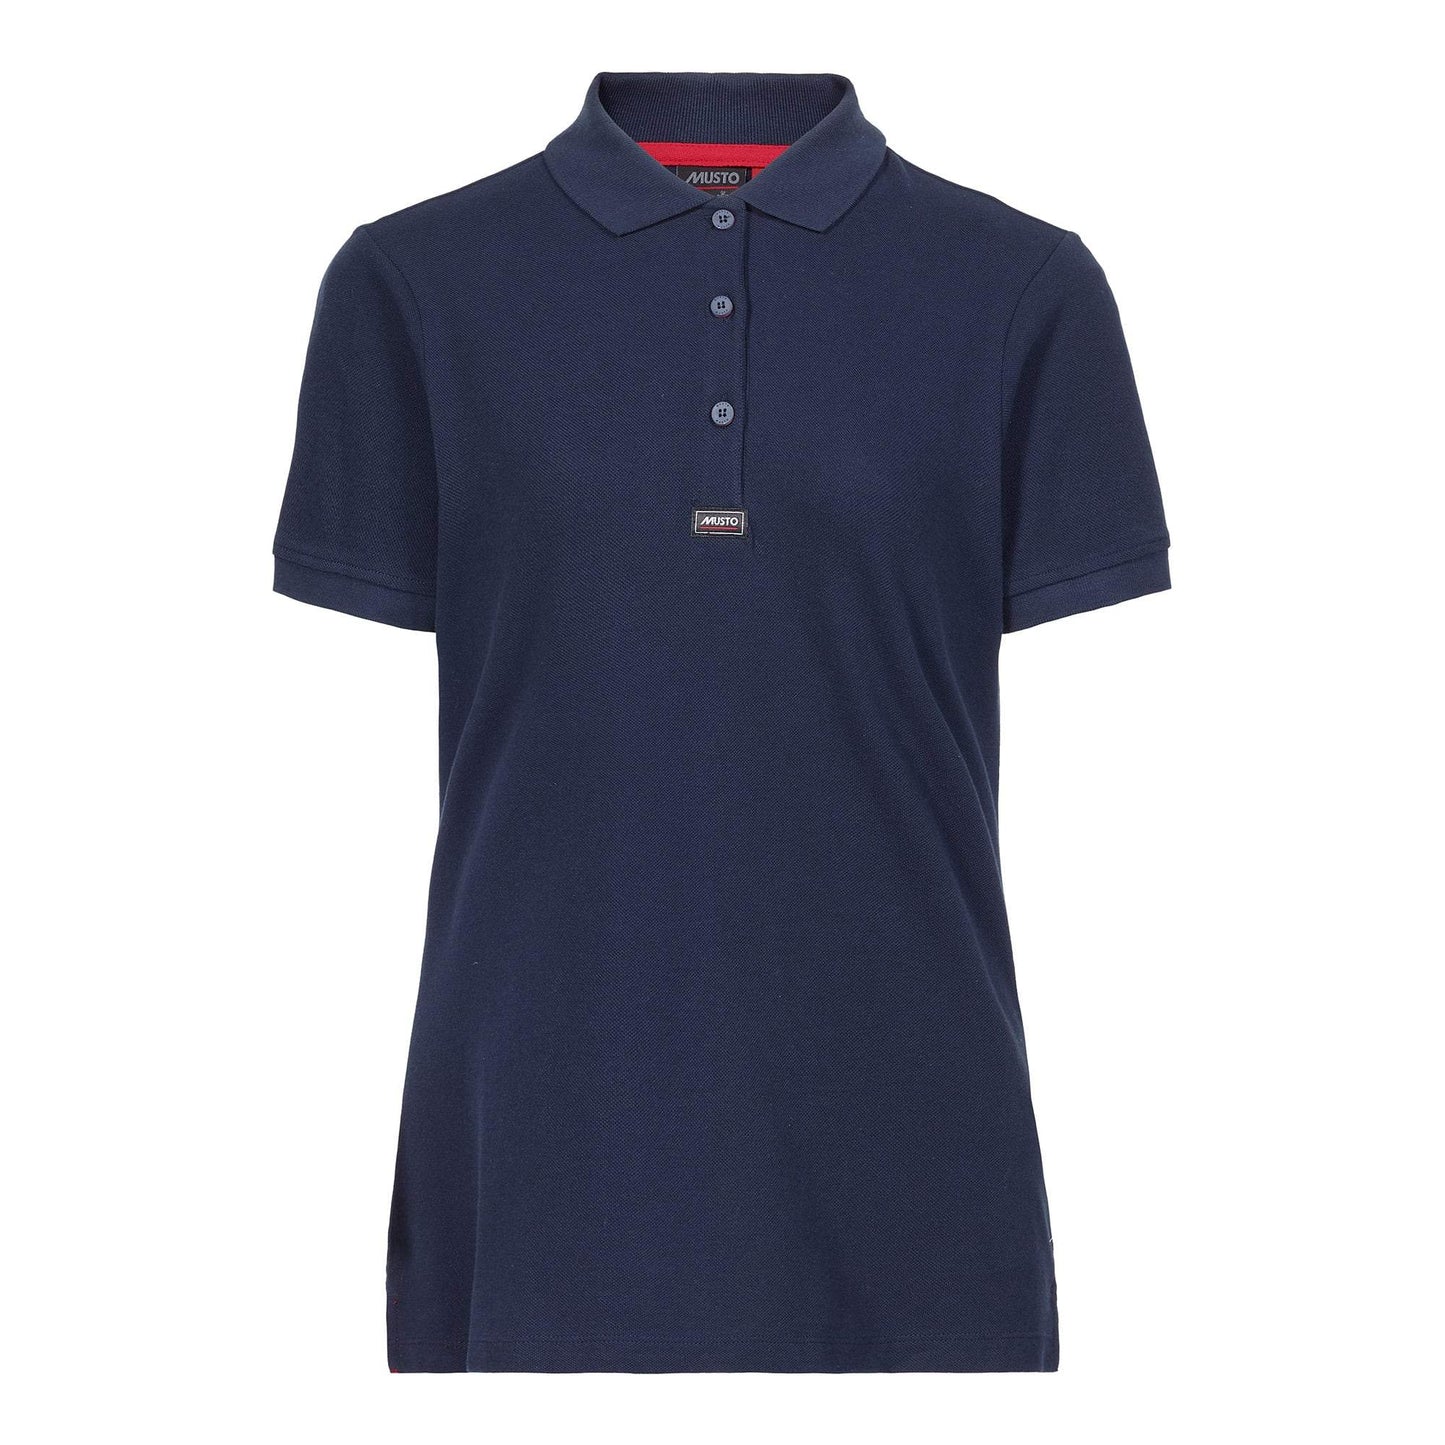 Women’s Ess Pique Polo by Musto - The Luxury Promotional Gifts Company Limited